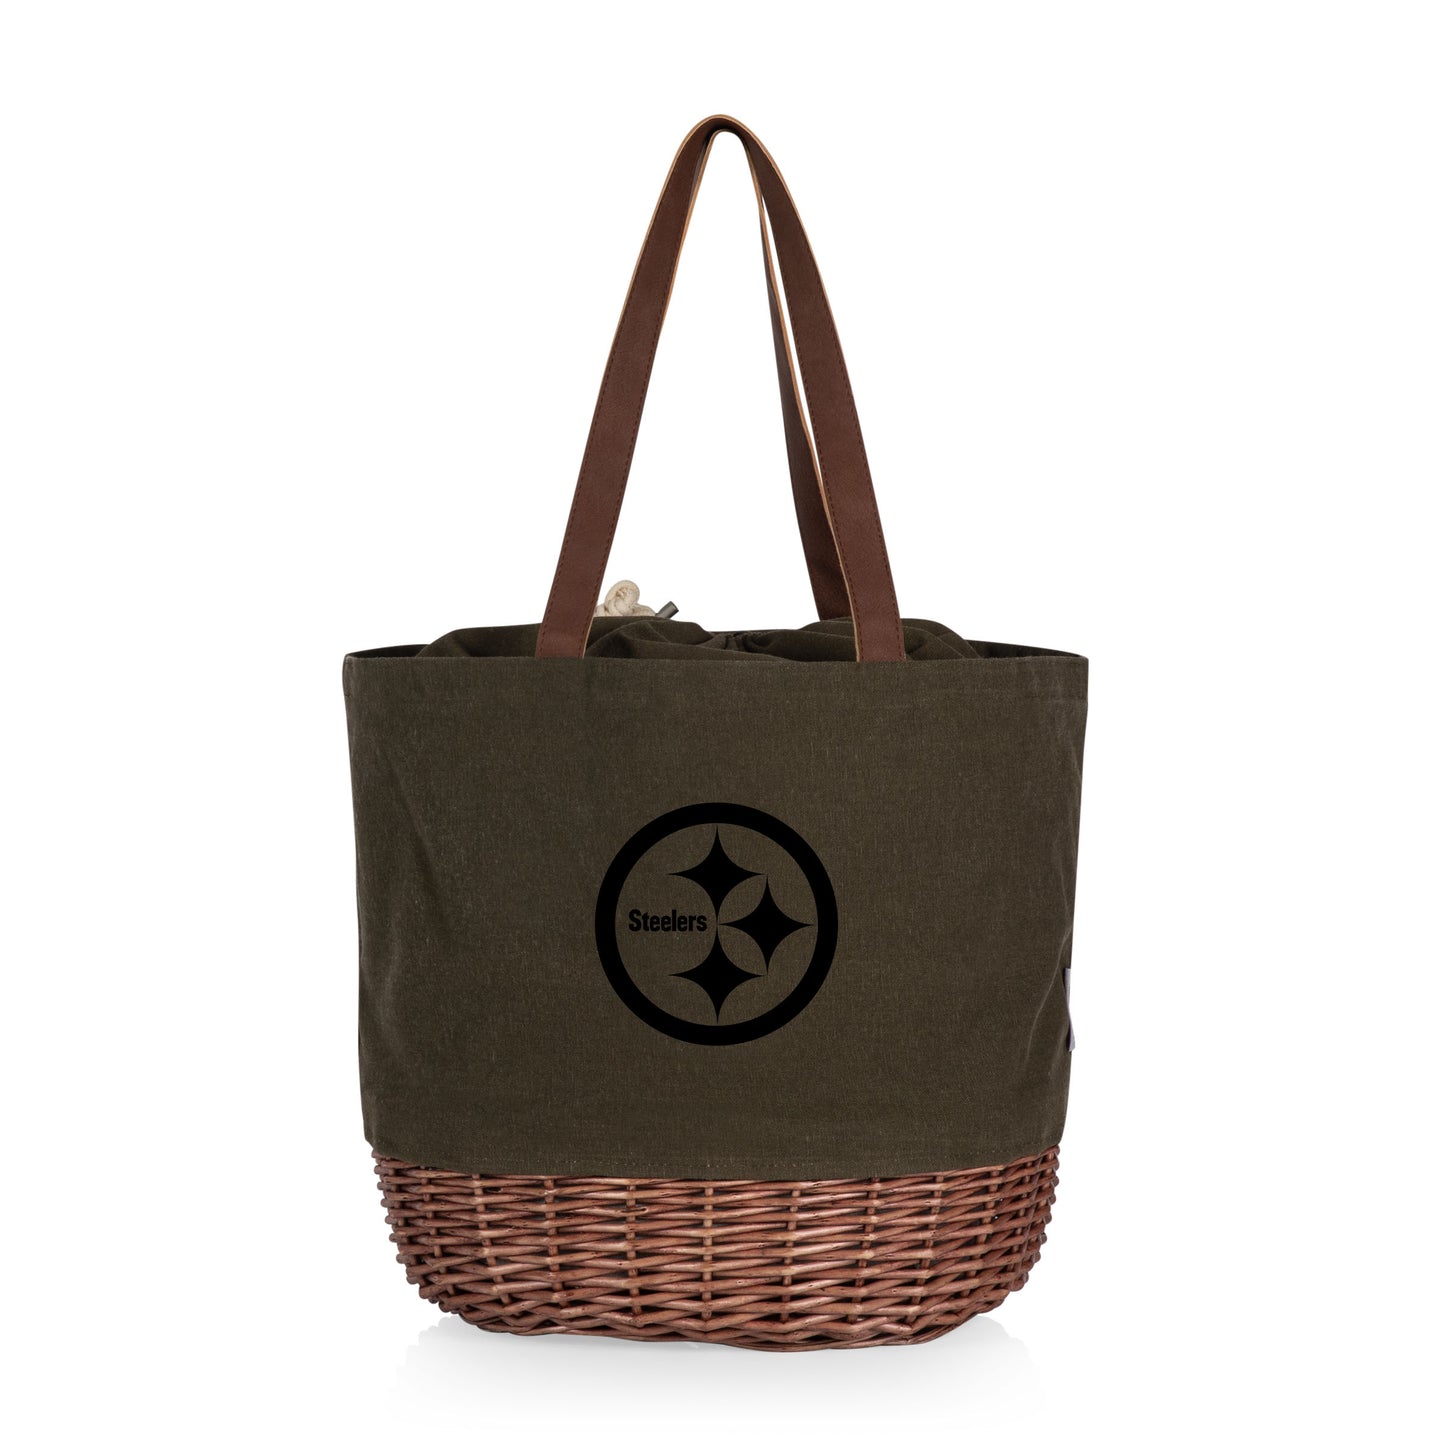 Pittsburgh Steelers - Coronado Canvas and Willow Basket Tote